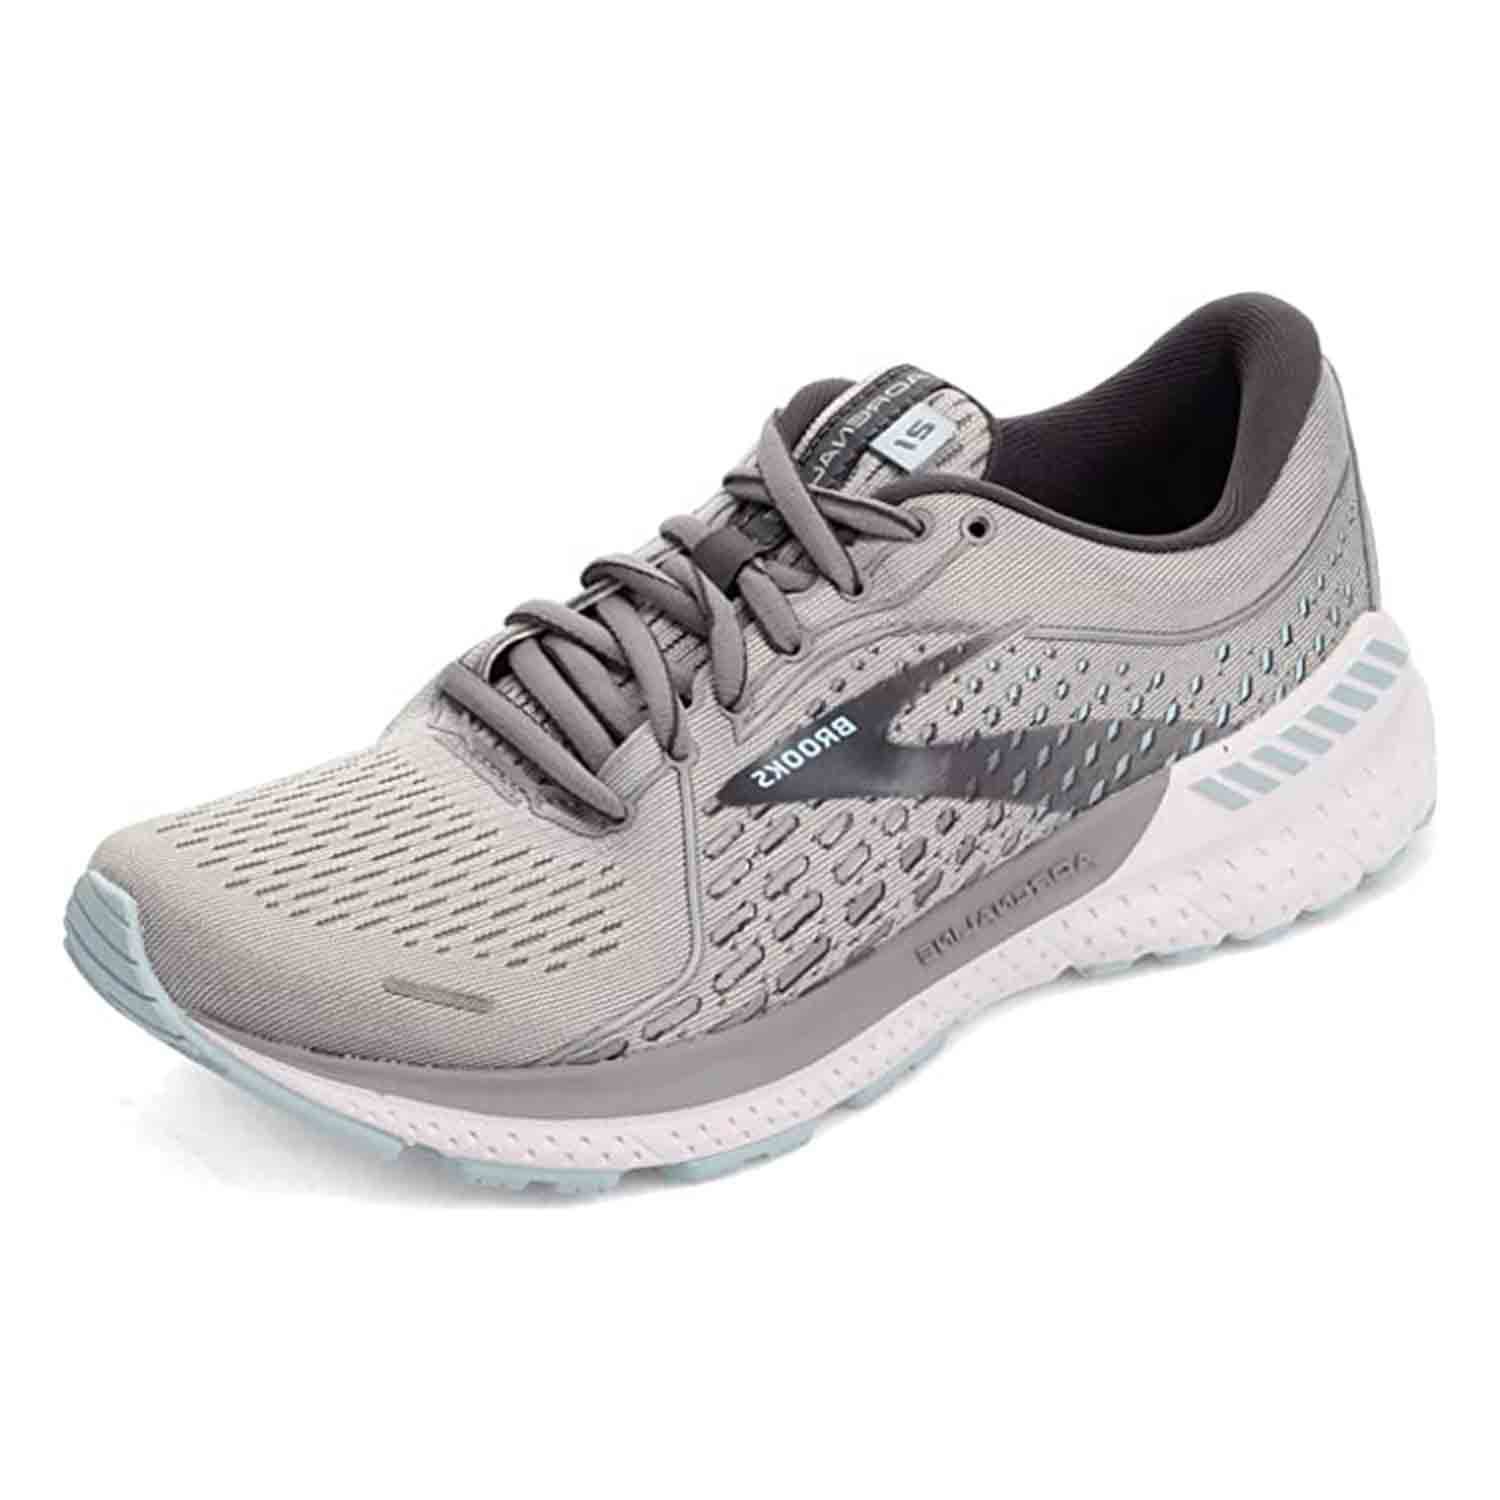 Best Running Shoes for Plantar